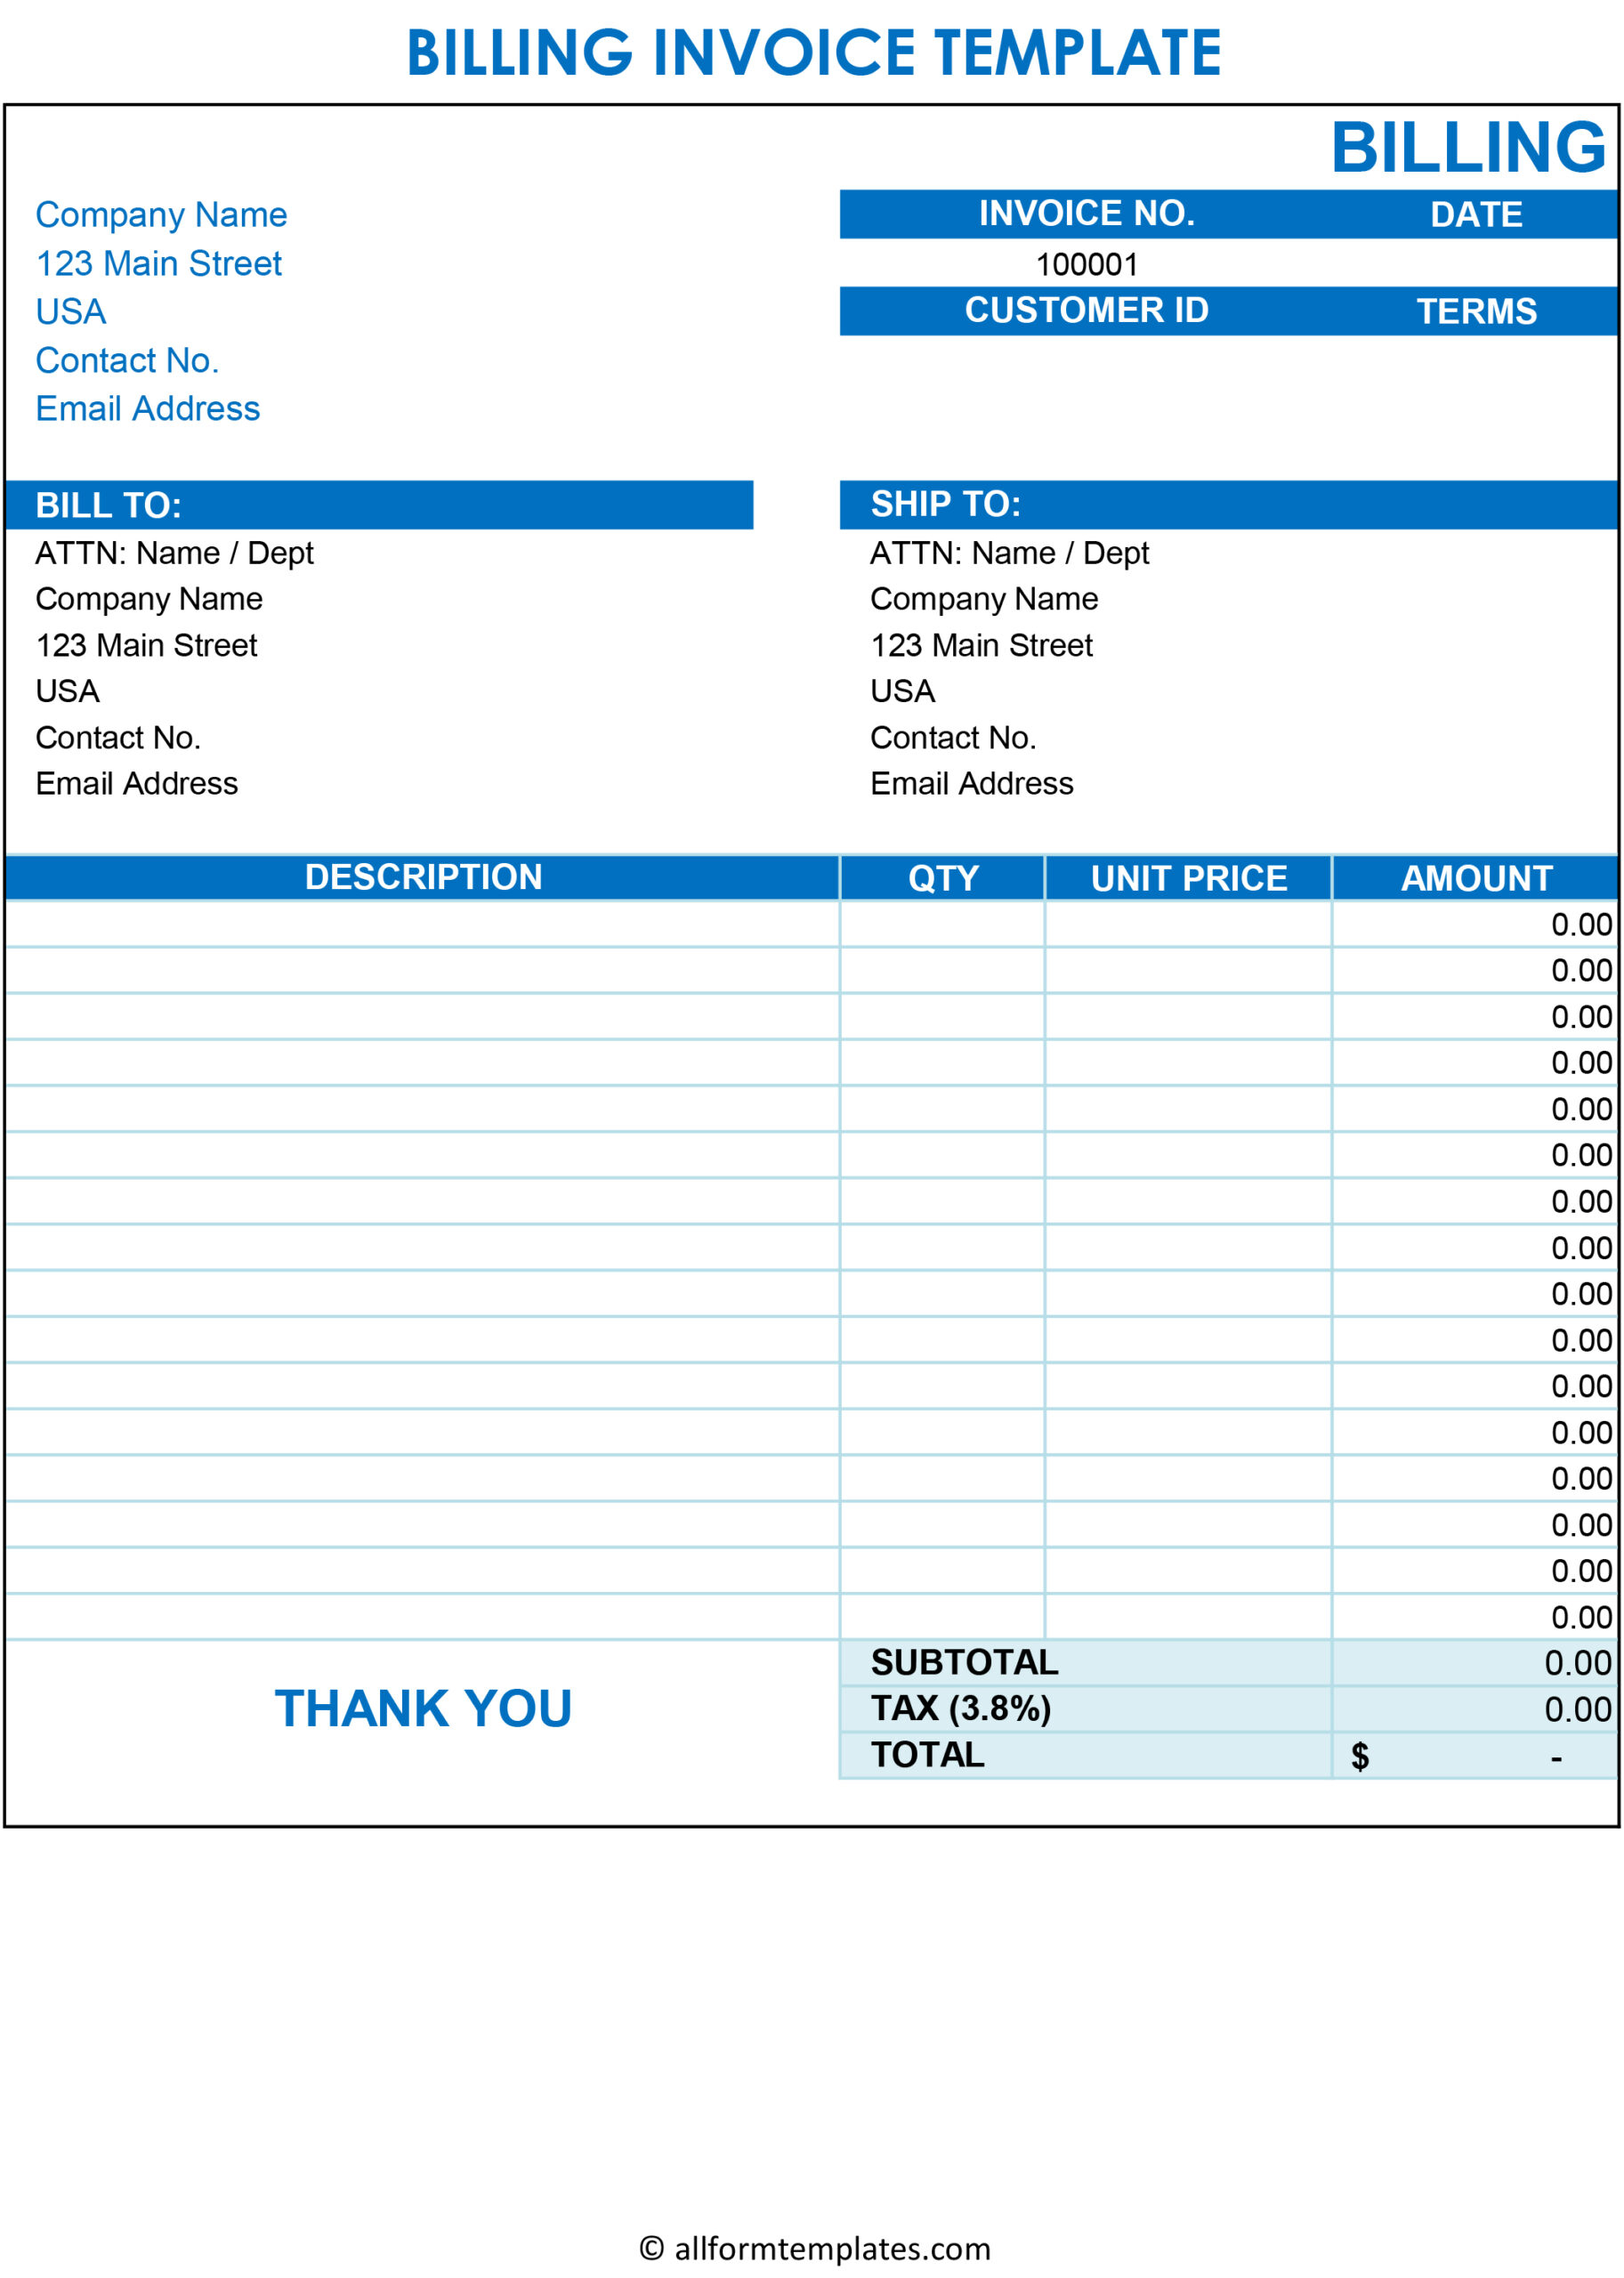 Free Blank Invoice Template Excel PDF Word 